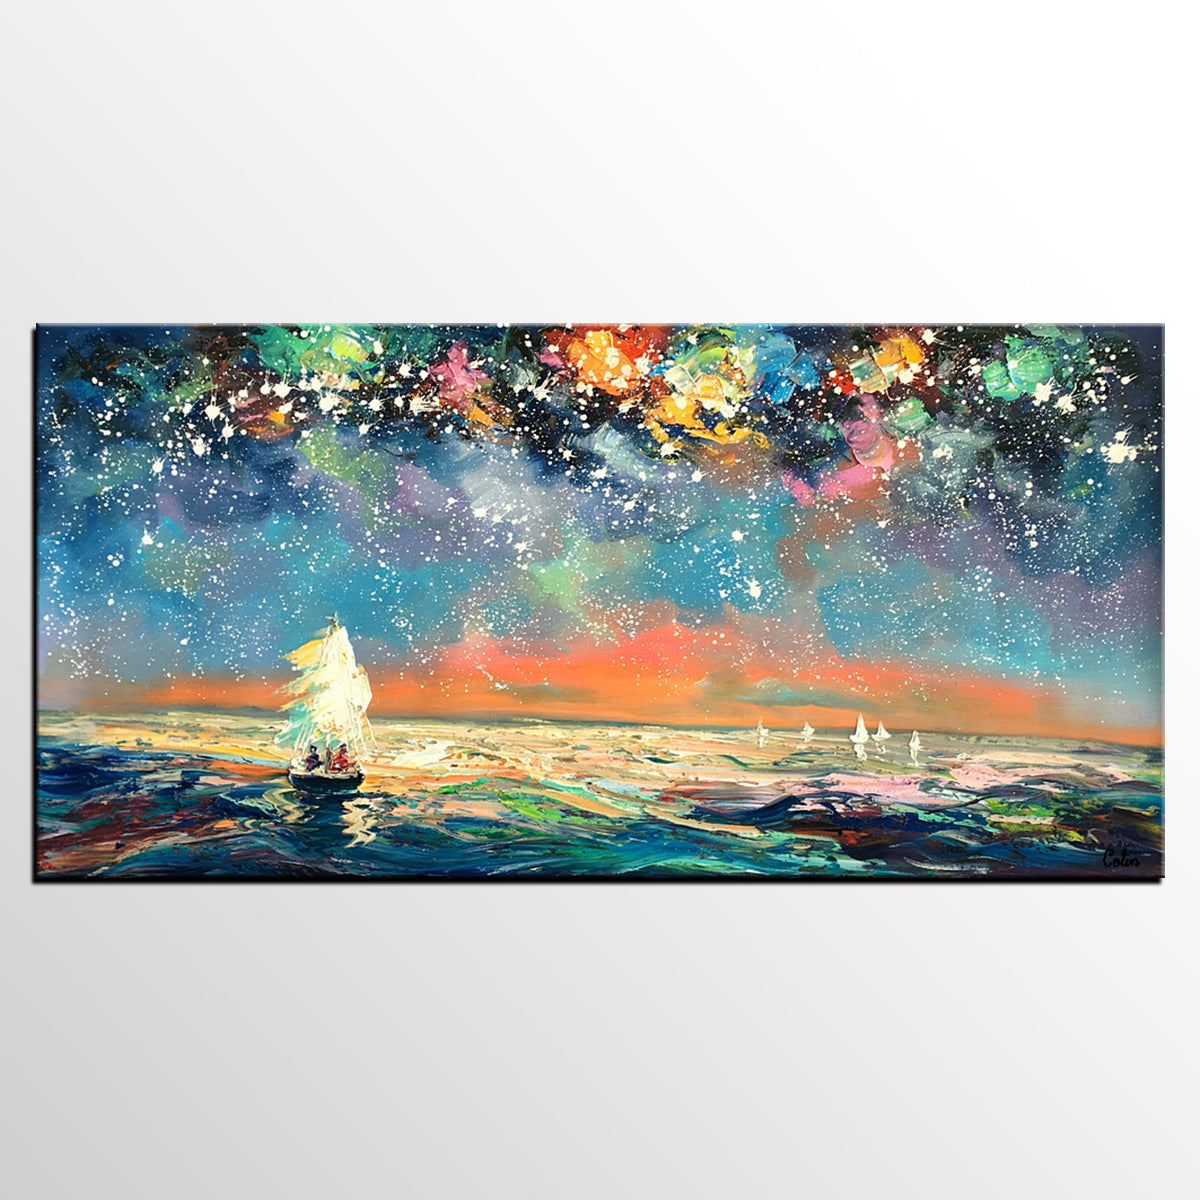 Palette Knife Painting, Impasto Painting, Starry Night Sky Painting, Landscape Canvas Painting for Dining Room, Custom Large Original Painting-Paintingforhome